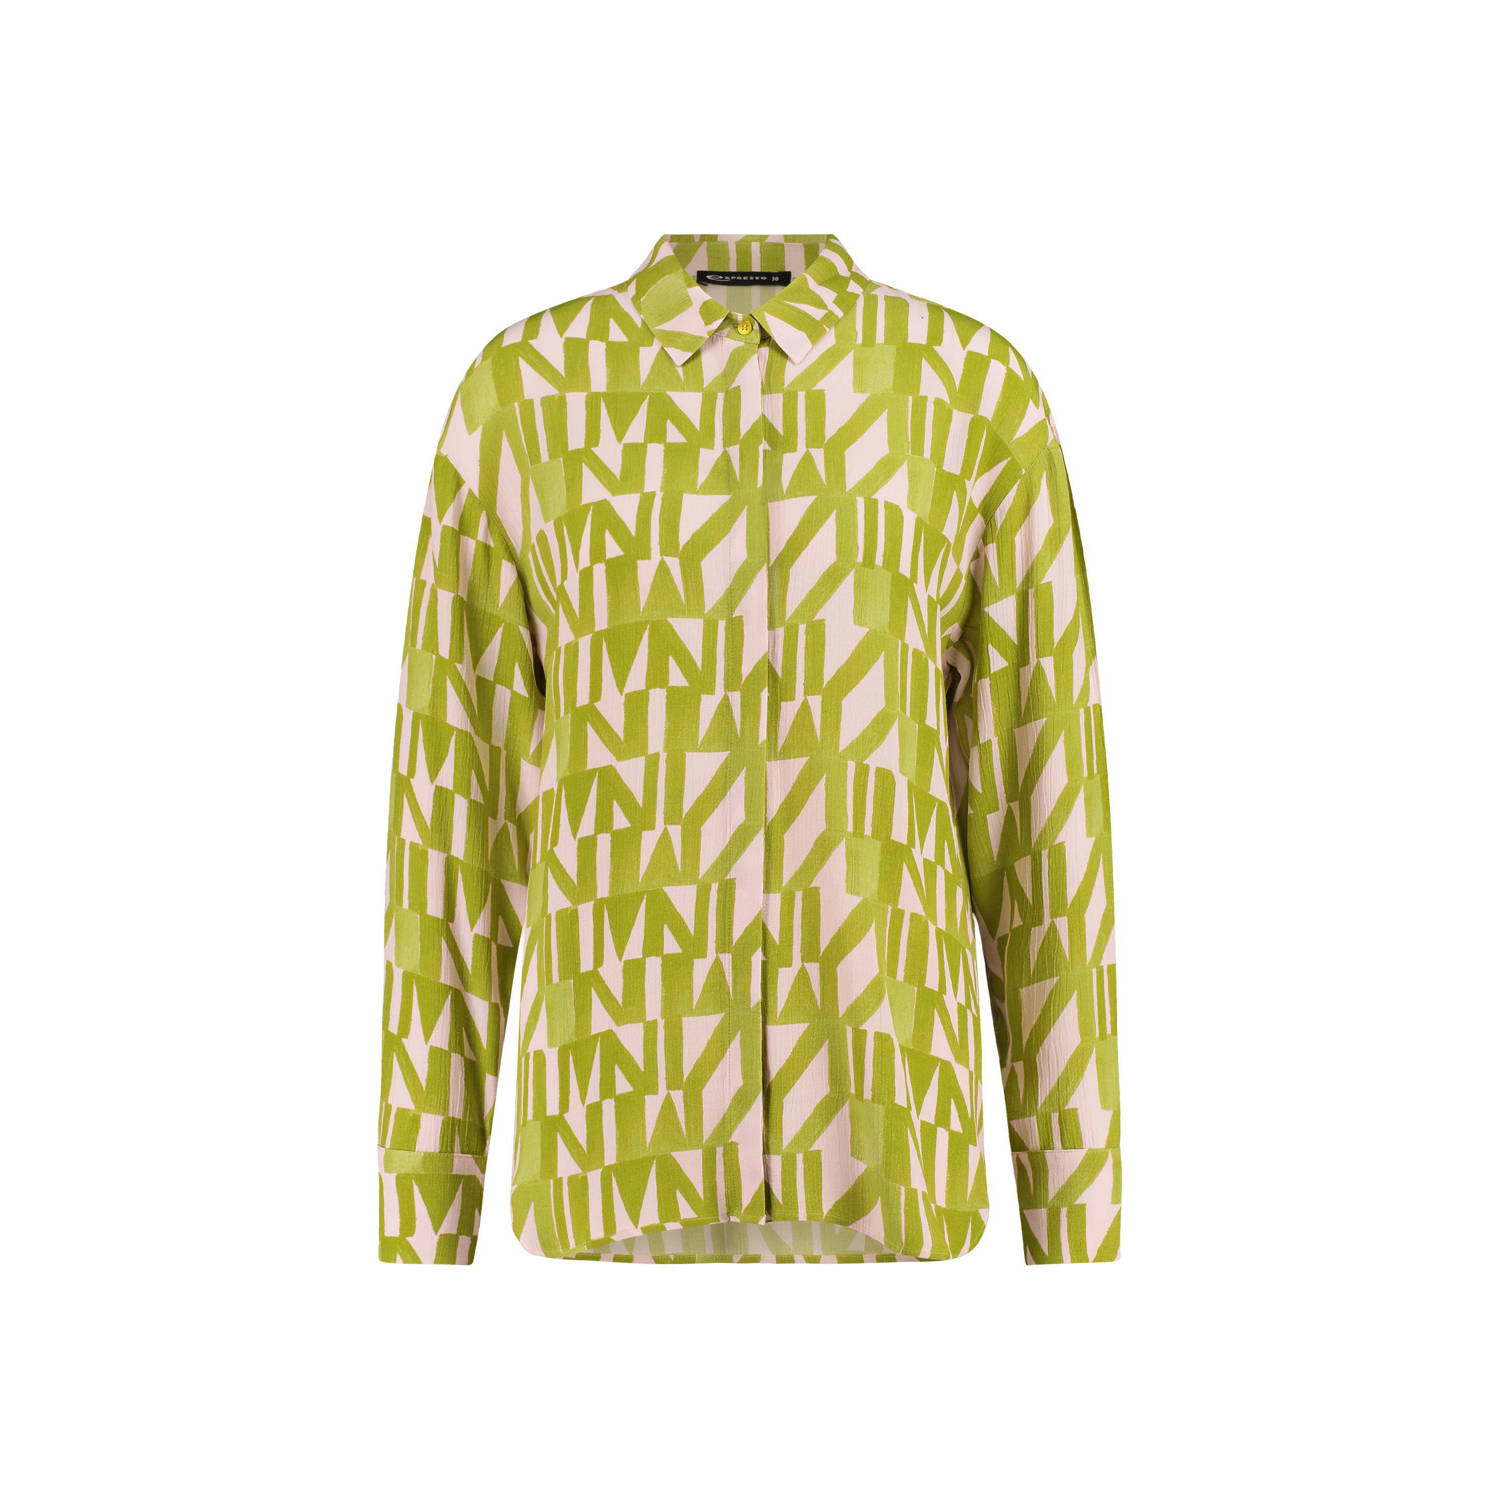 Expresso blouse met all over print limegroen lichtroze